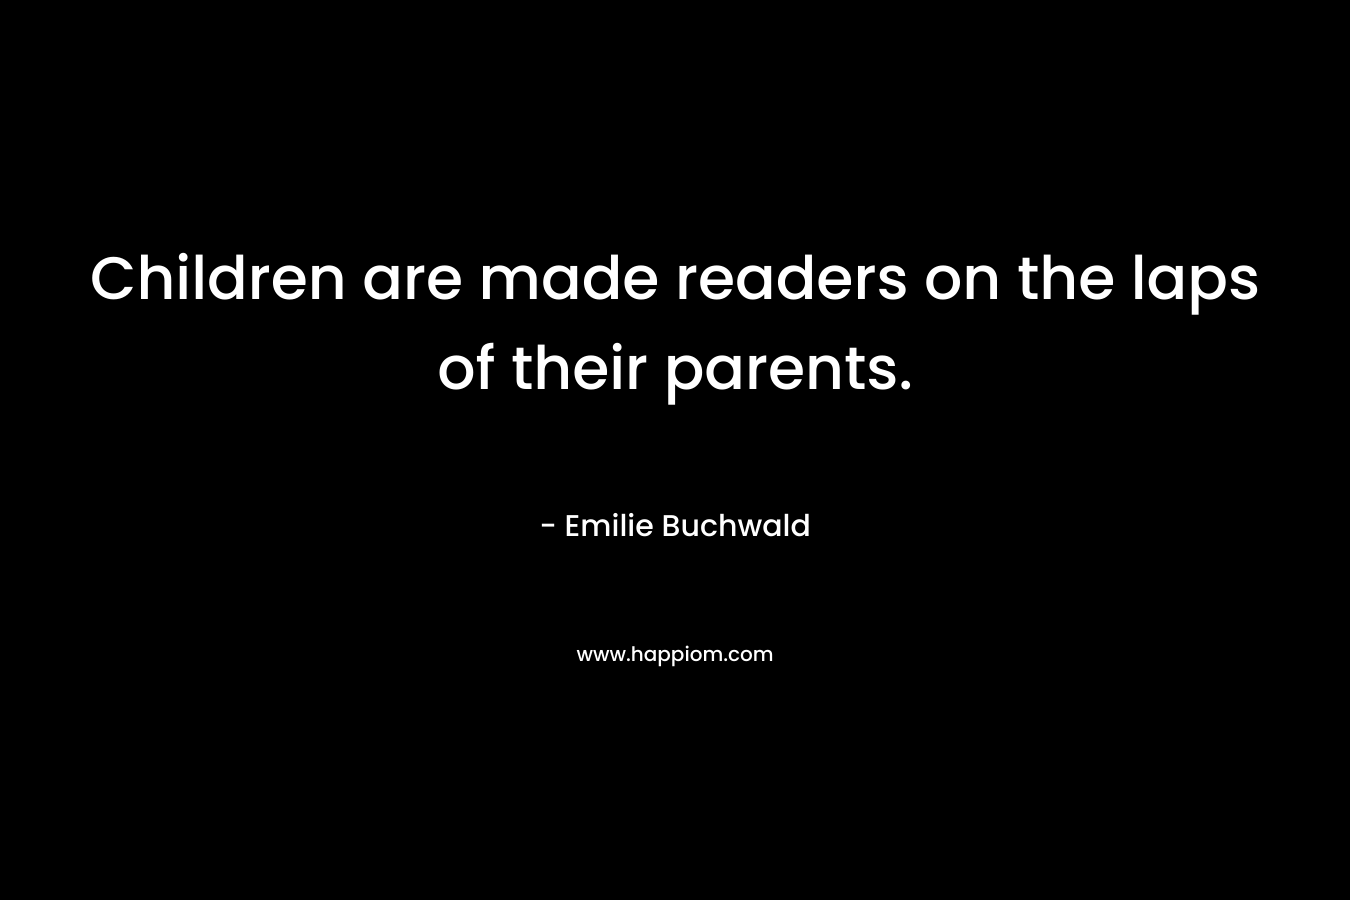 Children are made readers on the laps of their parents. – Emilie Buchwald